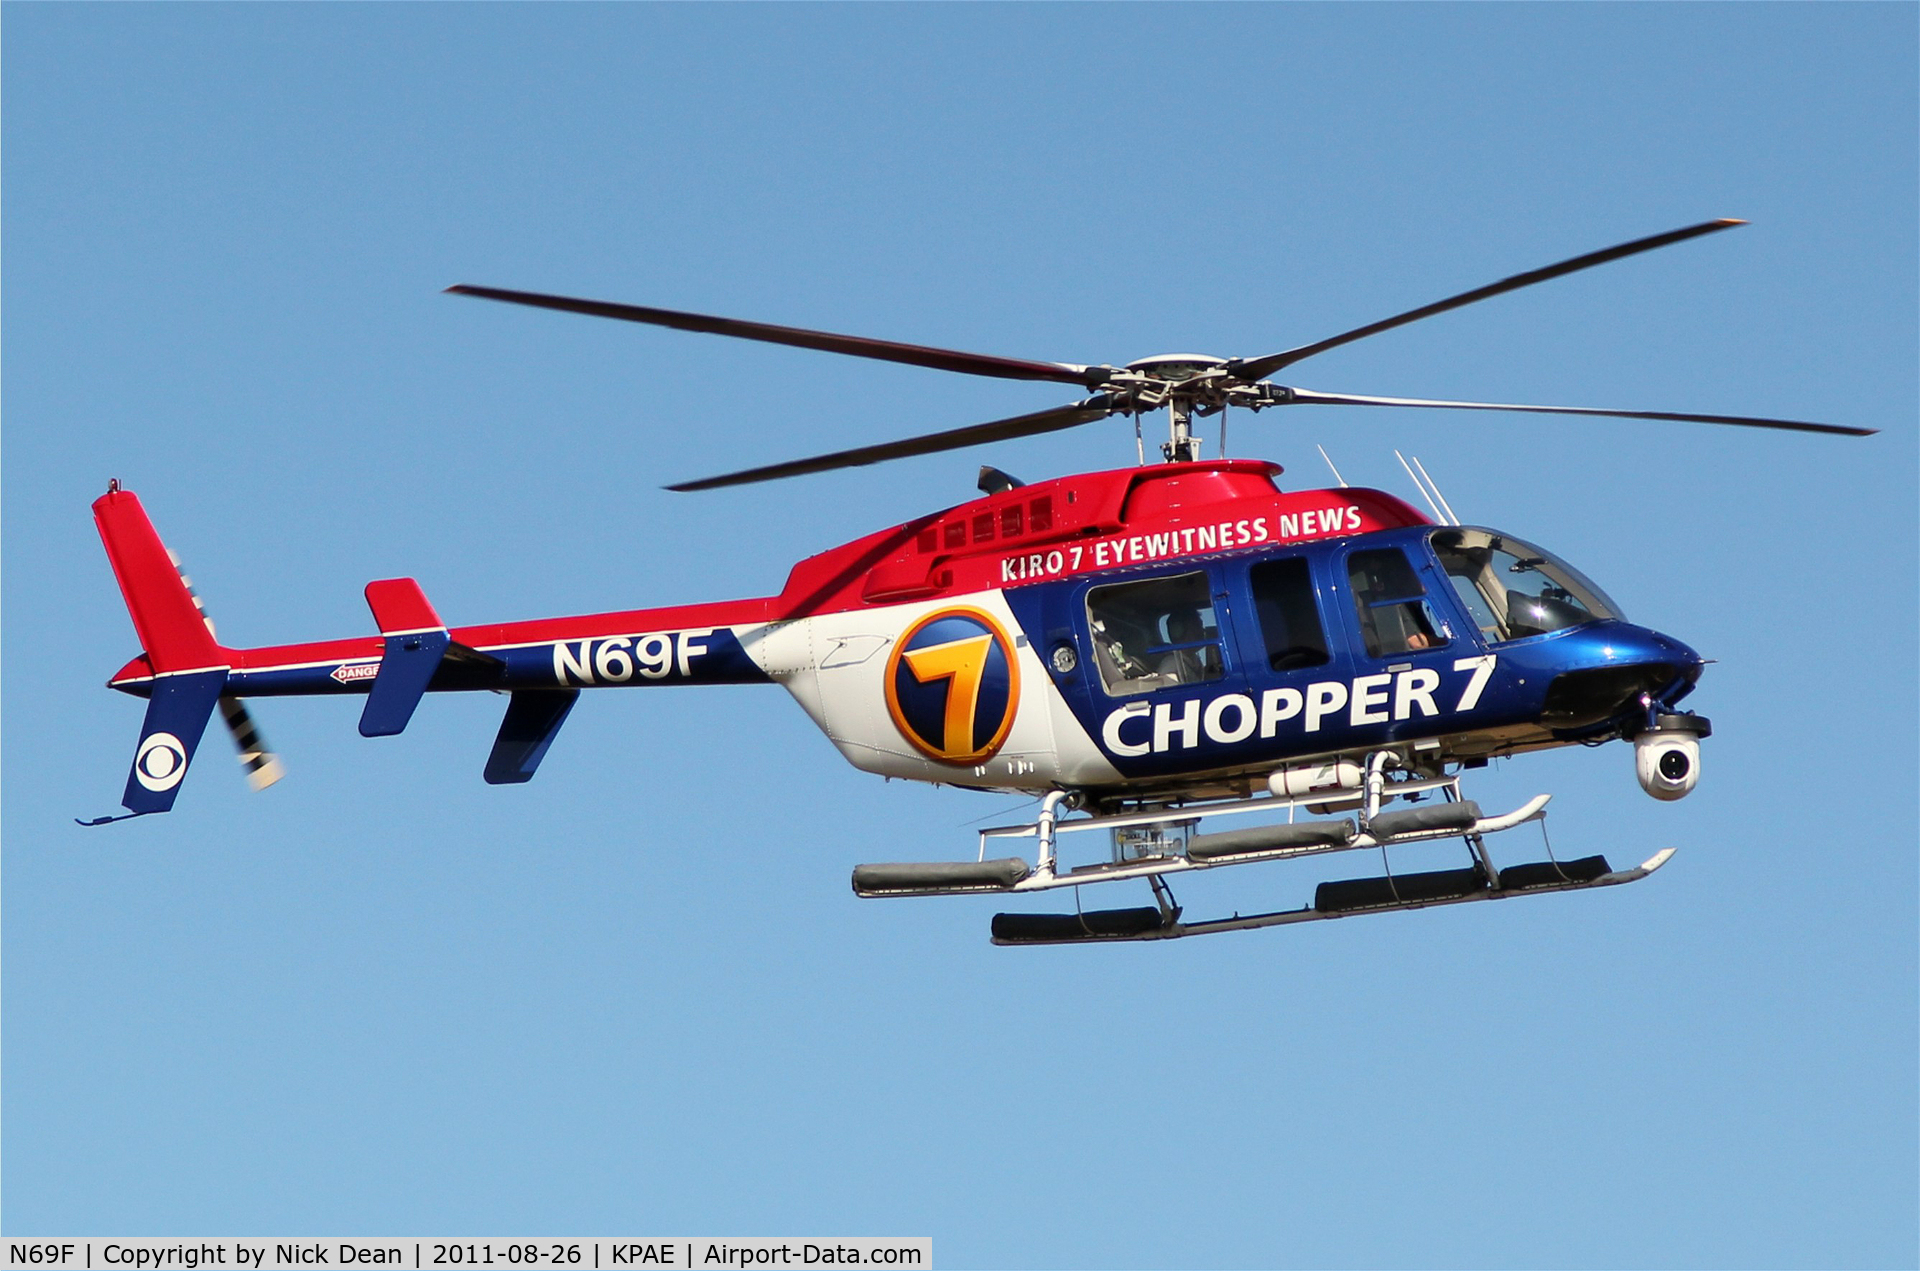 N69F, 1996 Bell 407 C/N 53025, KPAE/PAE Chopper 7 (N soixante neuf fox ) manouvering to land on the Castle and Cooke ramp at 